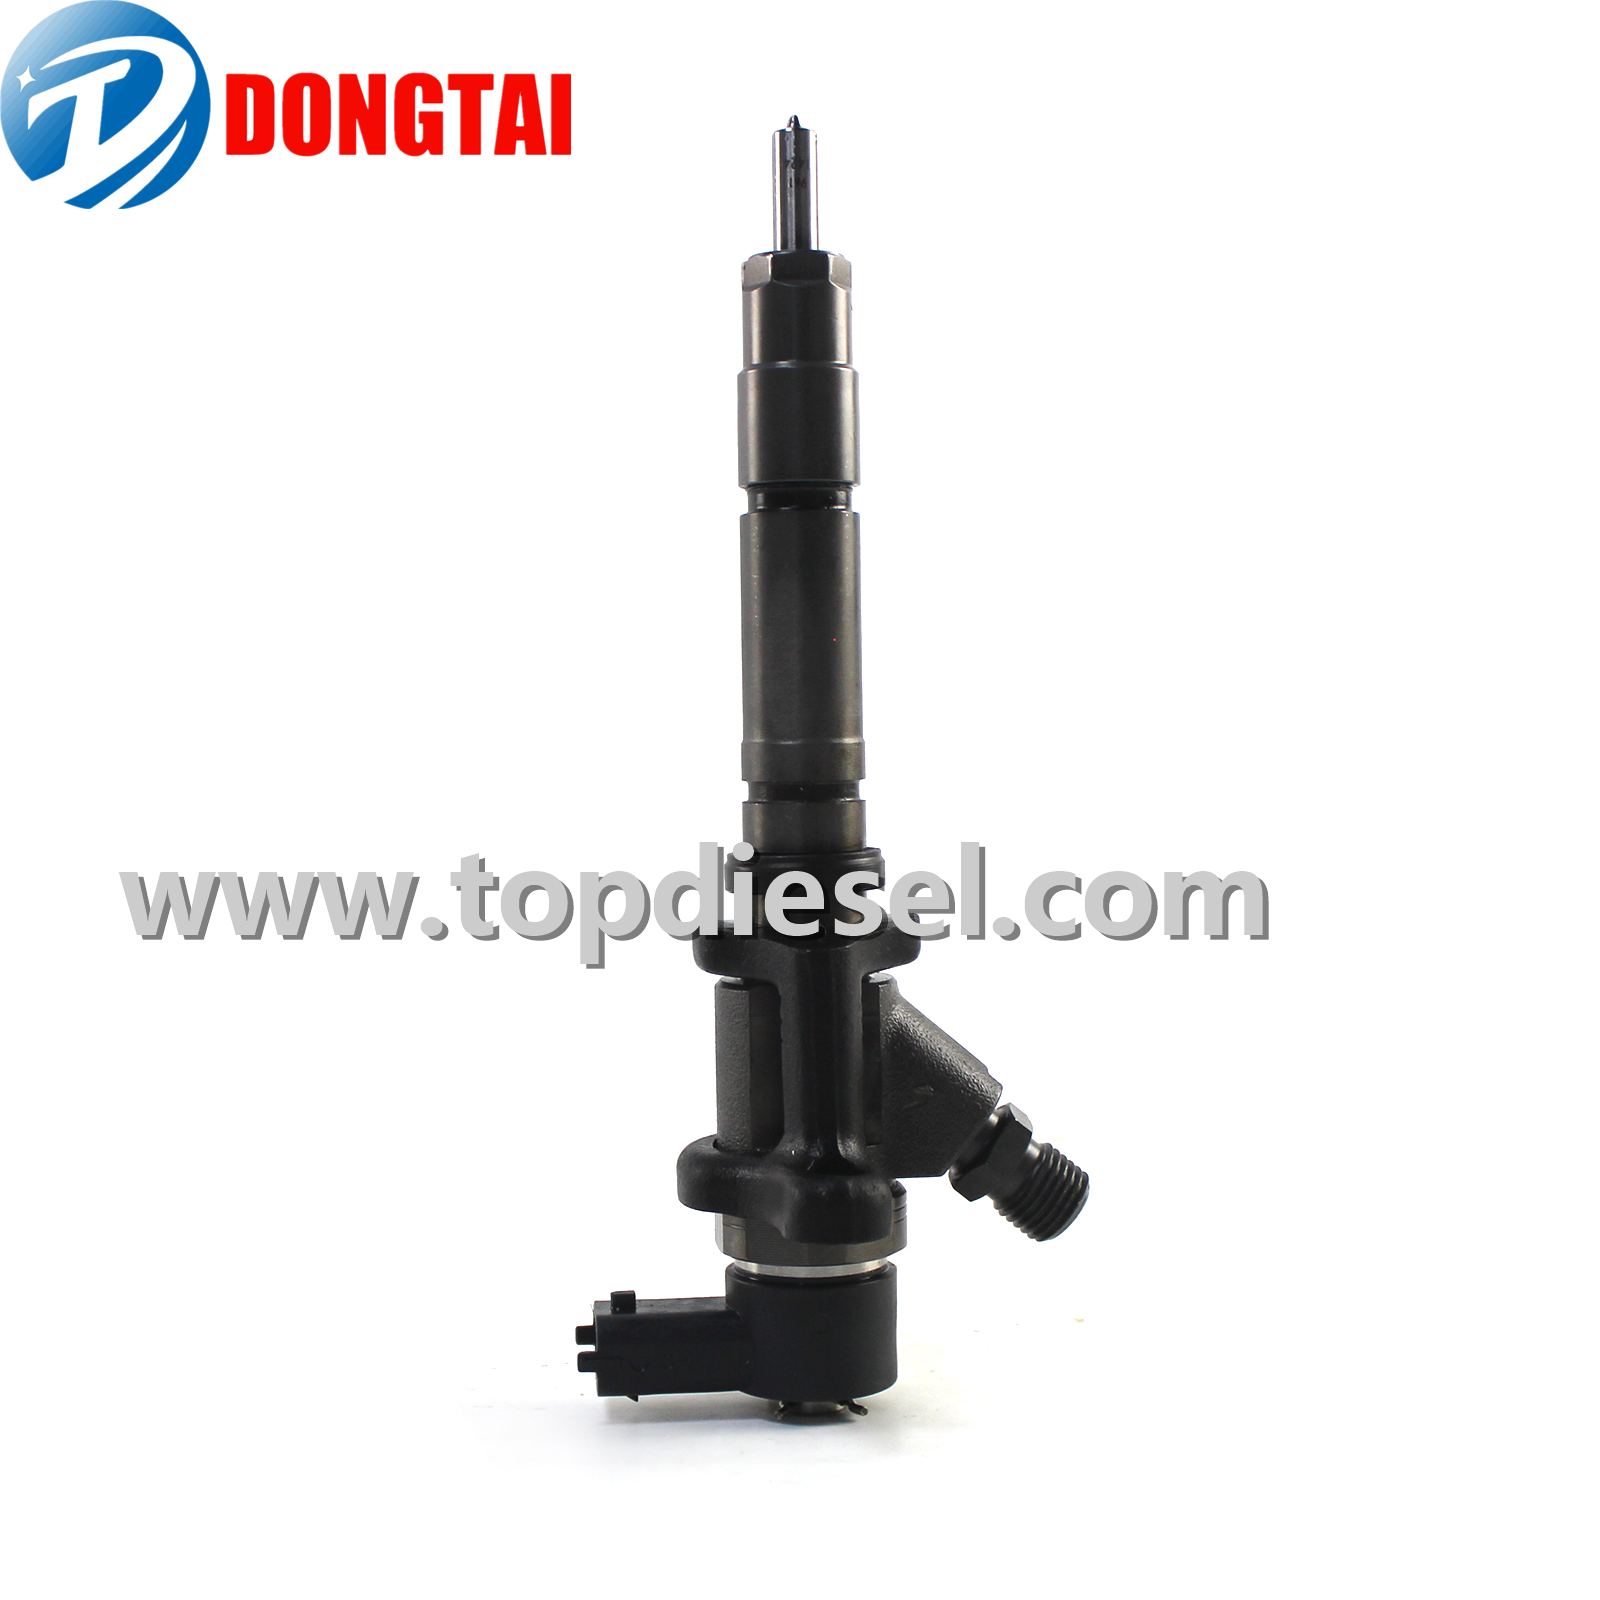 Well-designed Digital Timer And Heater Series - 0 445 120 163 BOSCH Common Rial Nozzle – Dongtai